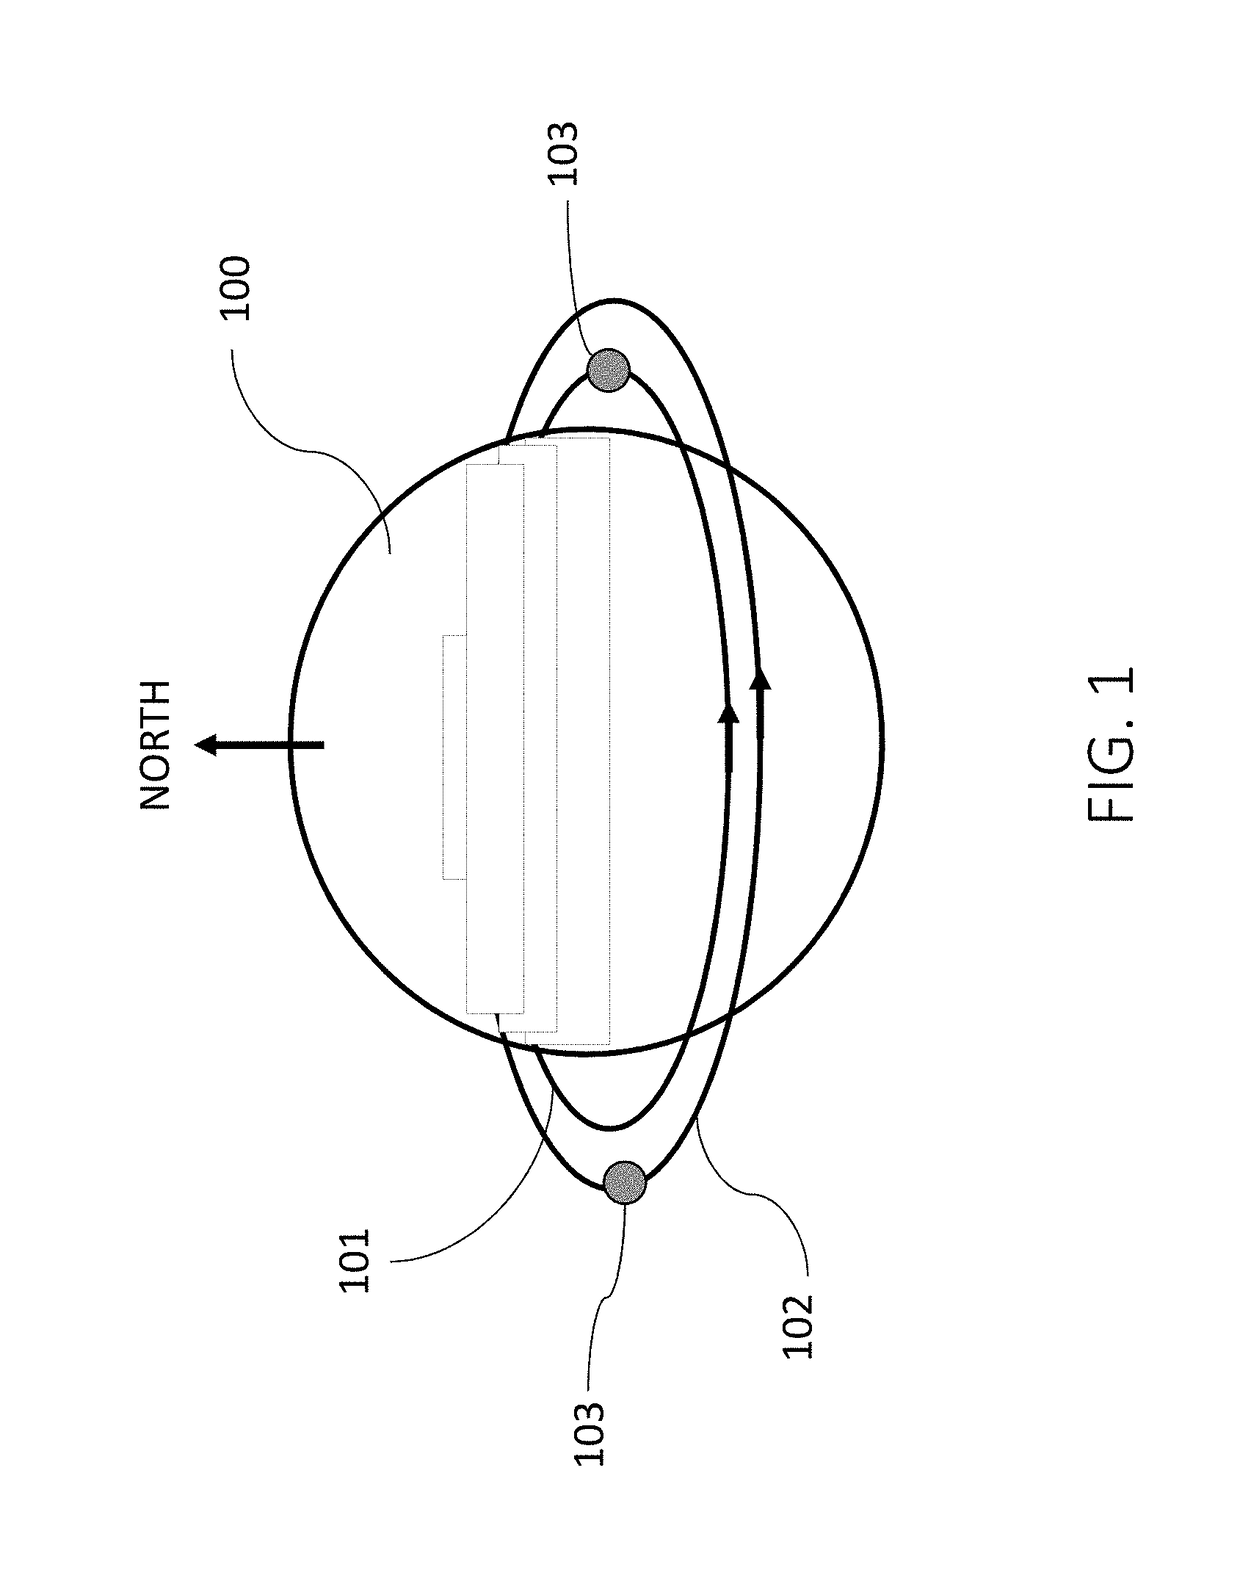 Apparatus and Methods for Orbital Sensing and Debris Removal